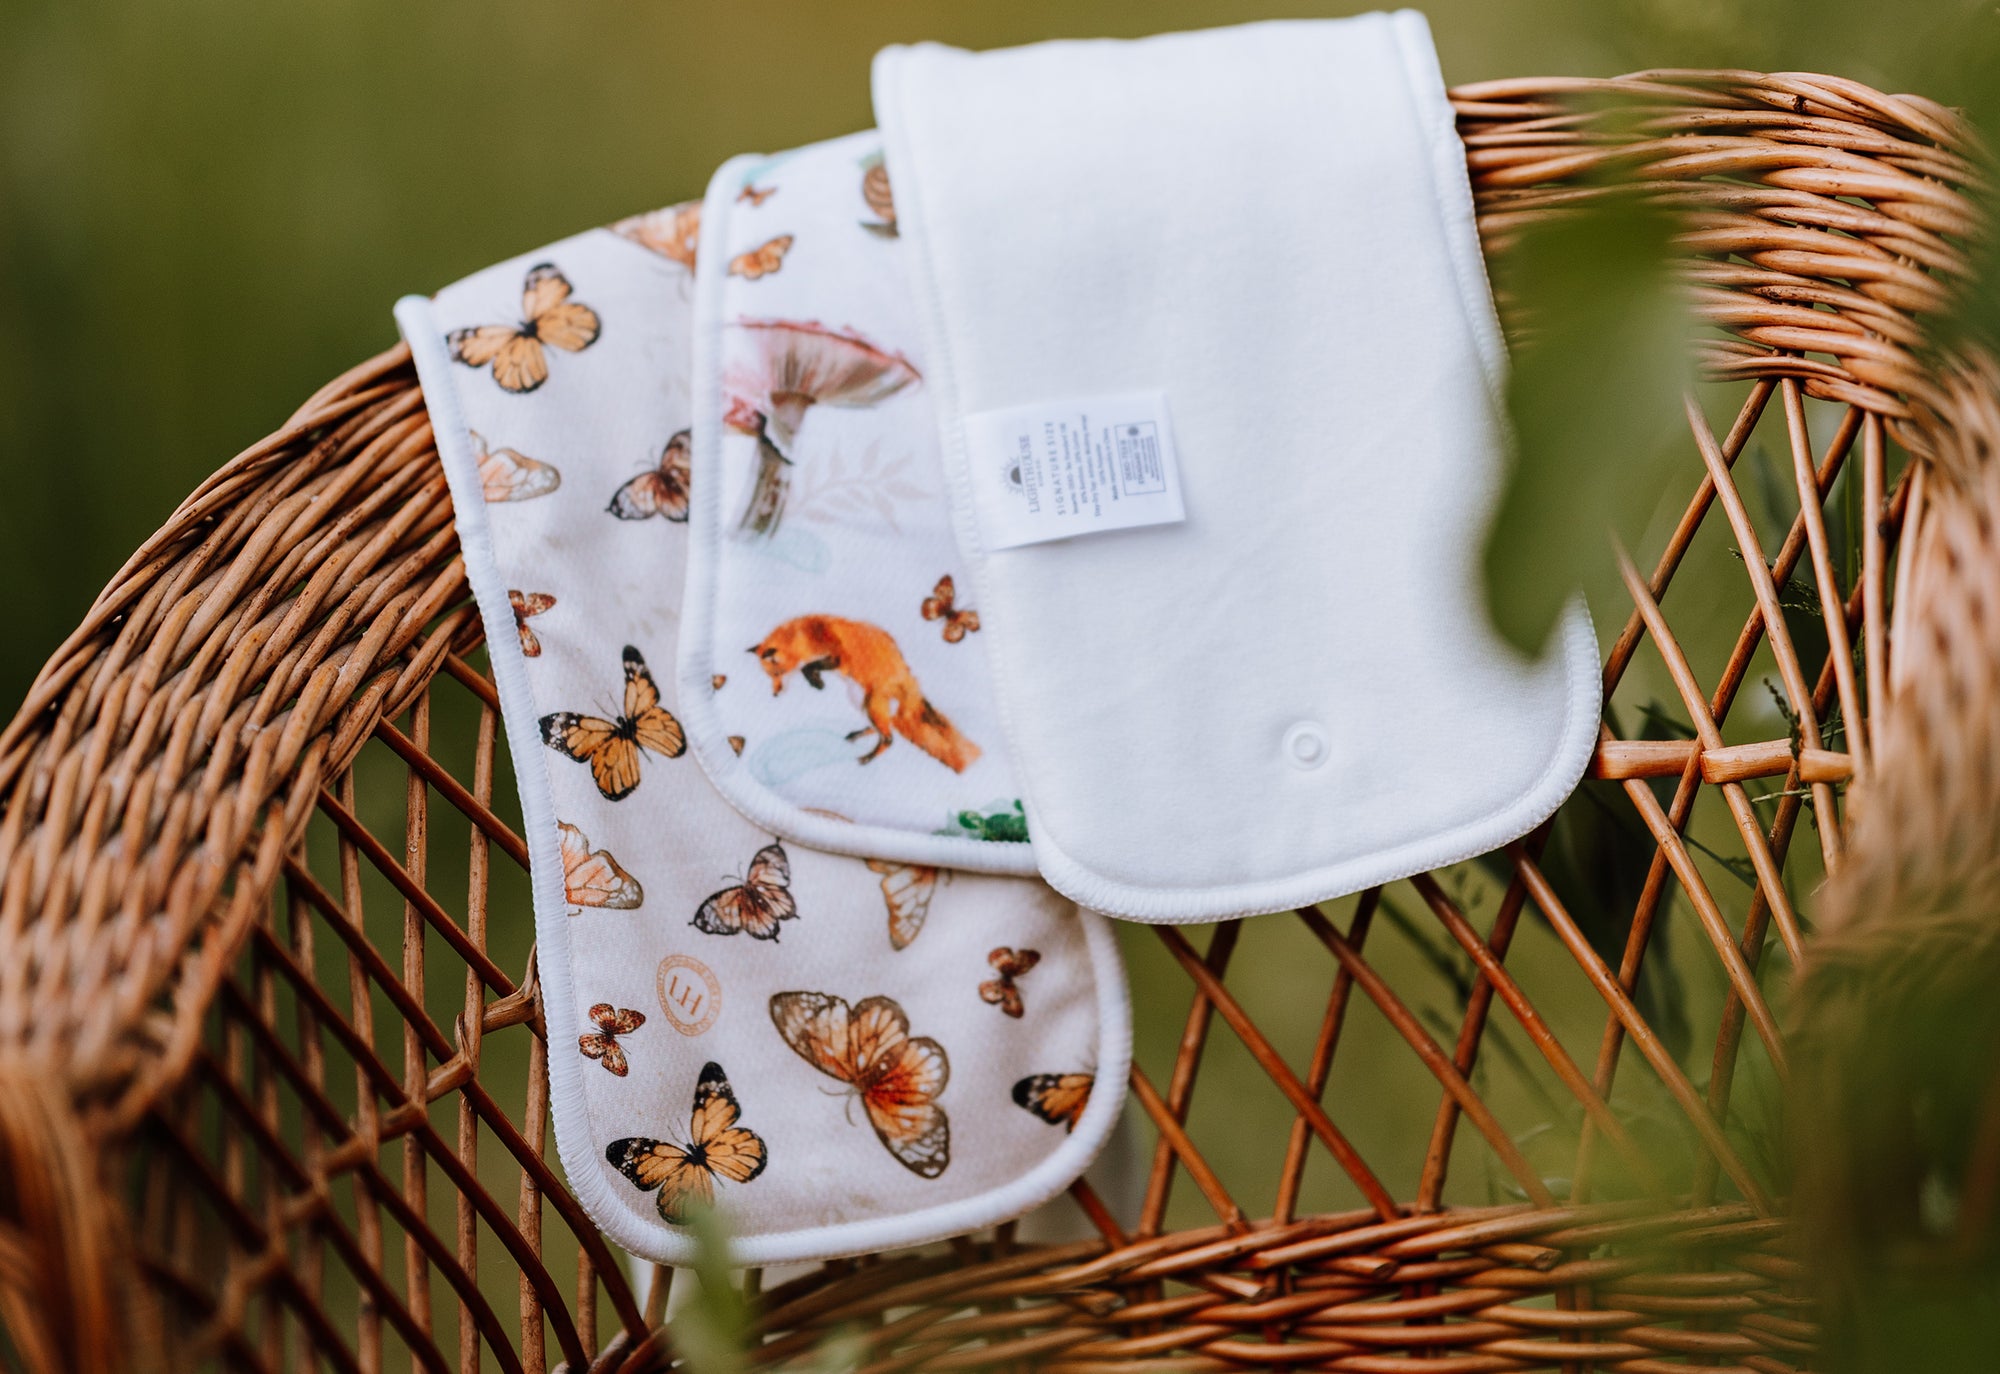 cloth diaper liners and how to use them